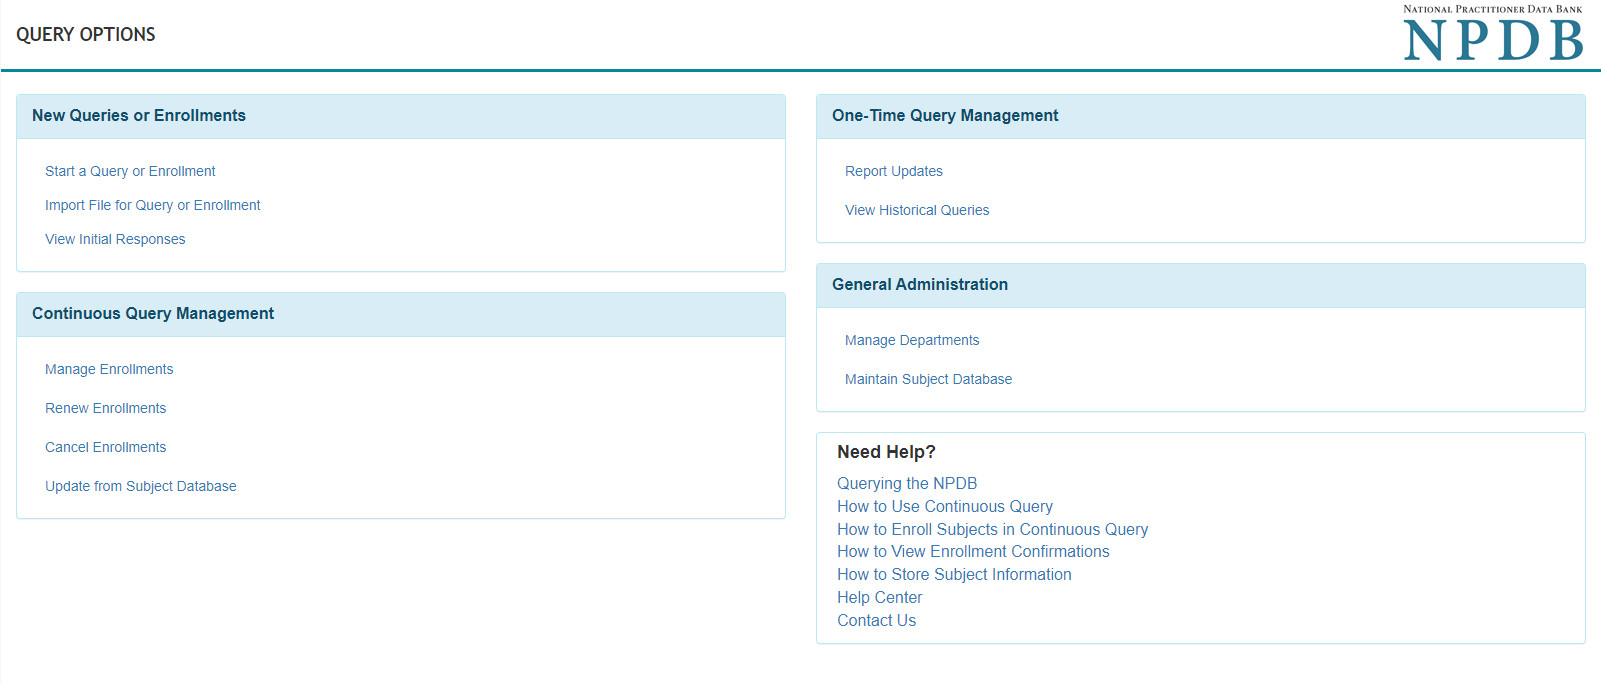 Screenshot of the Query Option Page